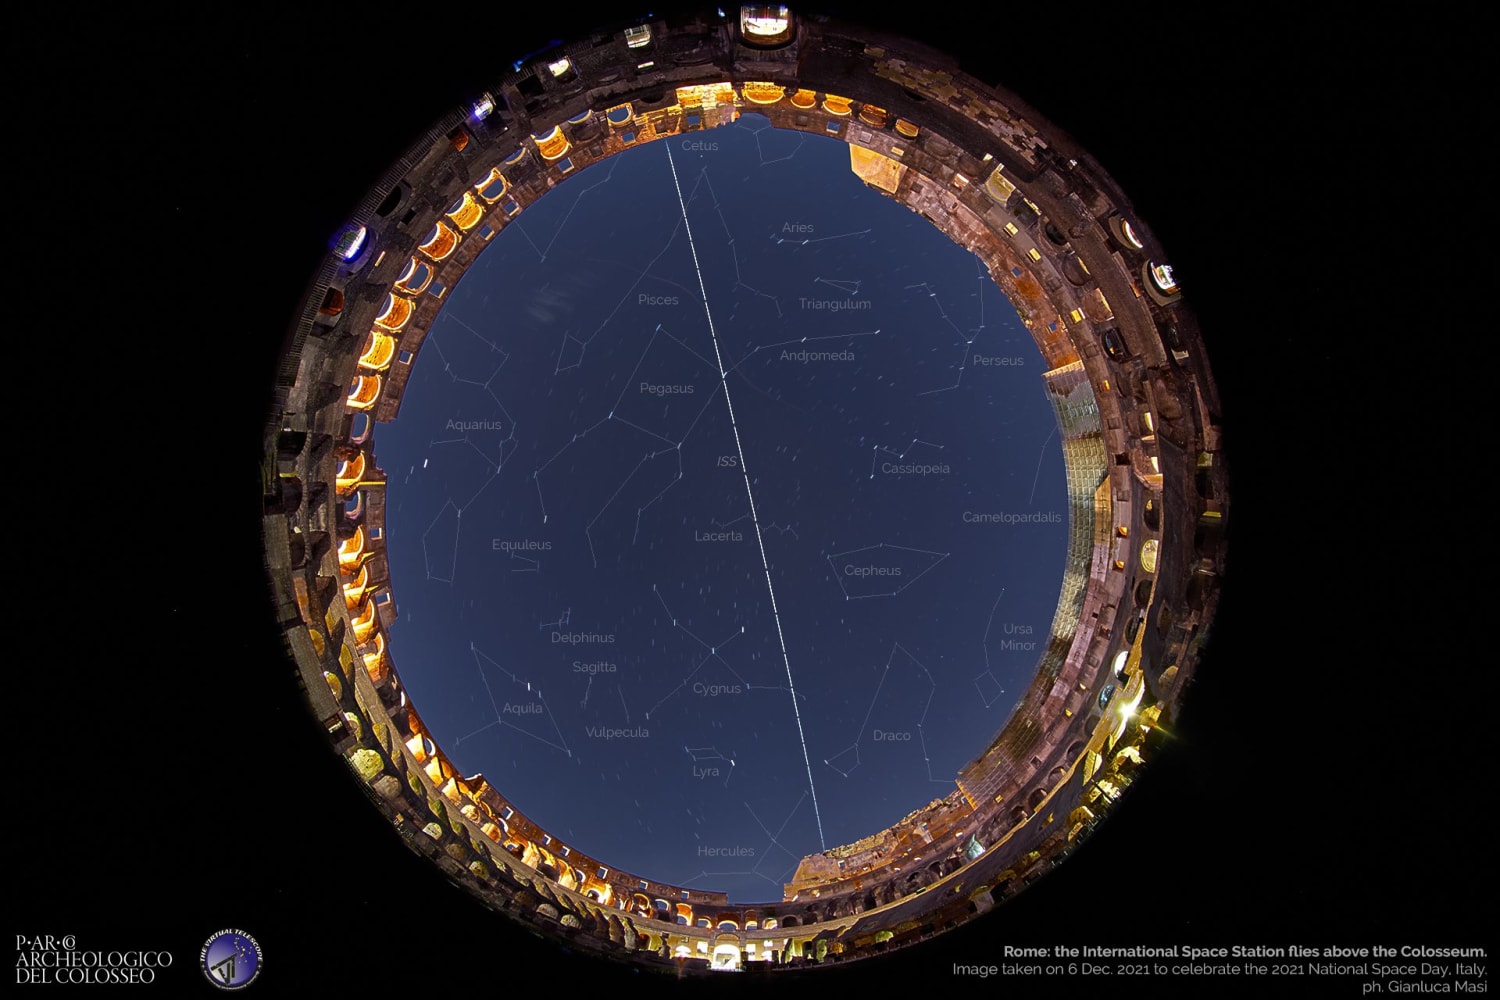 Astrophysicist Gianluca Masi took this picture of the ISS flying directly over the Colosseum in Rome